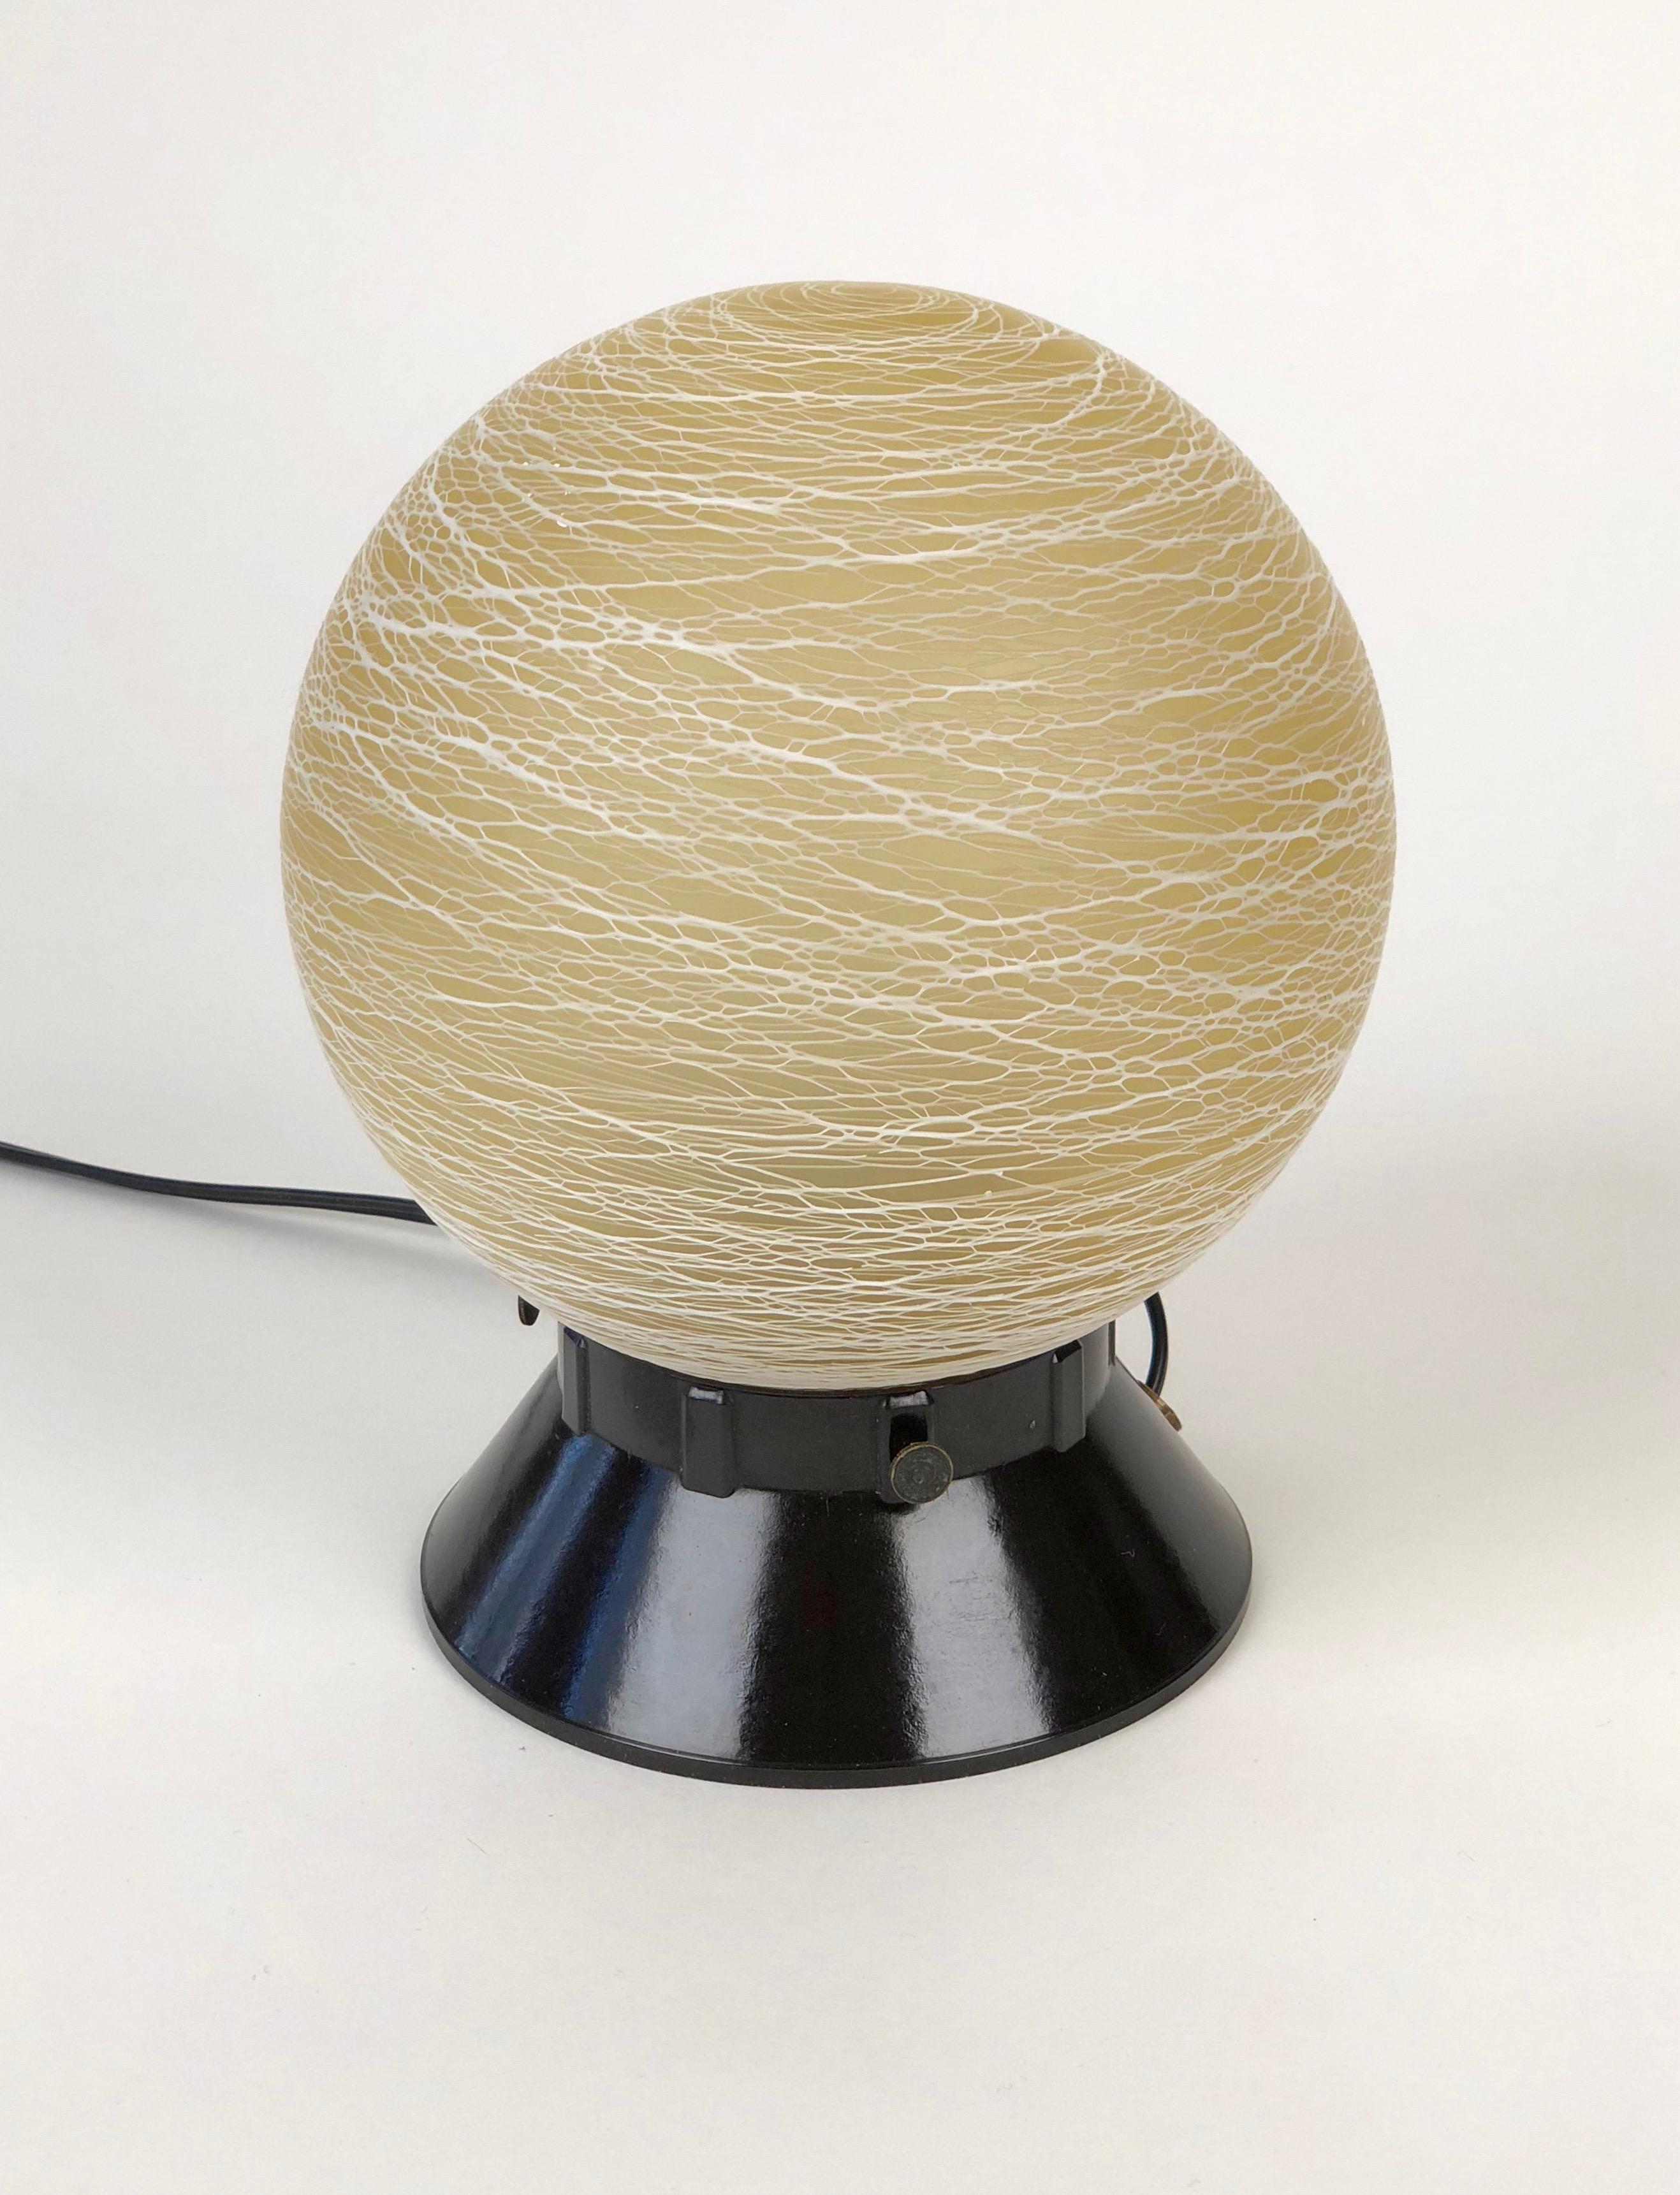 Austrian table lamp from the 1930s, is composed of a Bakelite base with a glass ball.
The pattern on the ball is made up of erratic lines that criss cross the surface accenting the round of the form.